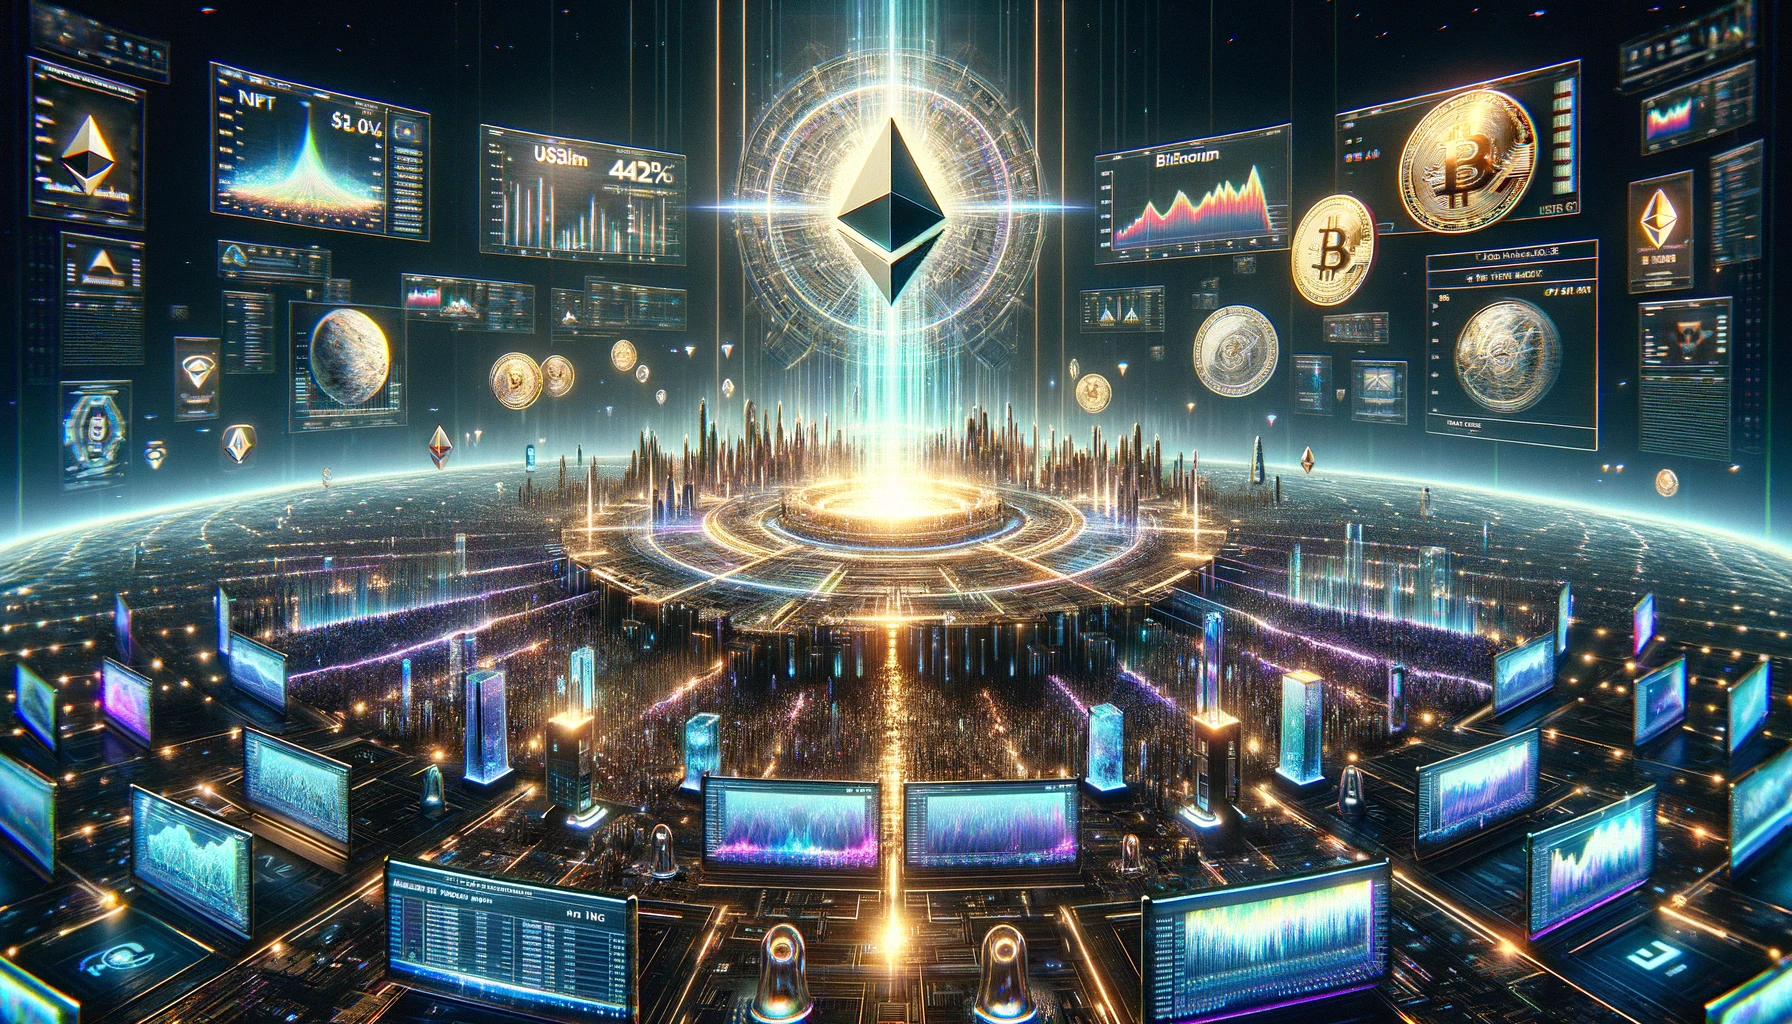 DALL·E 2024-04-05 15.16.39 - Visualize the dominance of Ethereum in the NFT market, capturing a moment of record-breaking sales. The scene unfolds on a grand digital arena, with E.webp